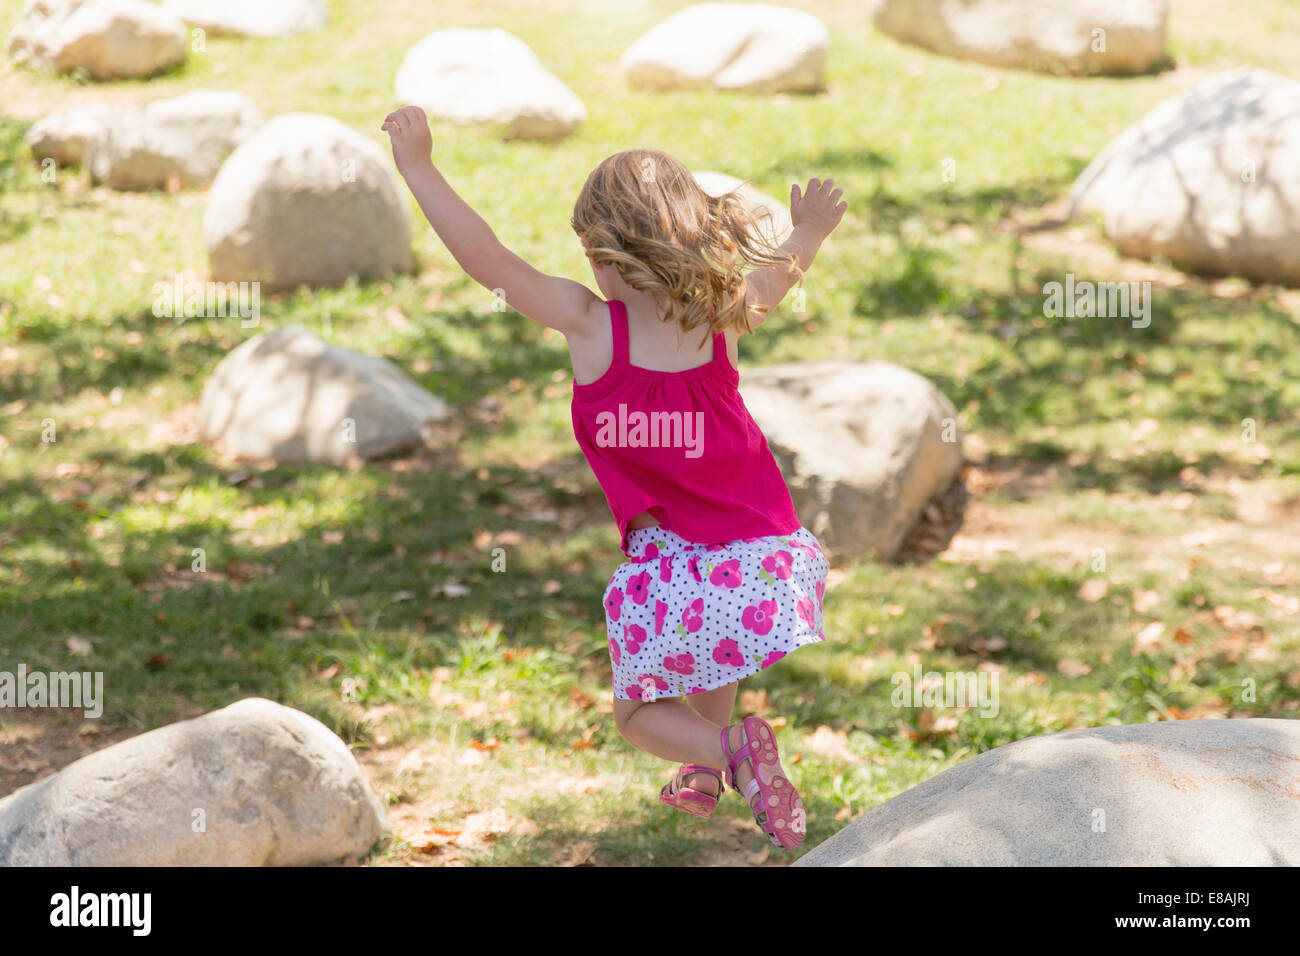 Young girl jumping from boulders in park Stock Photo